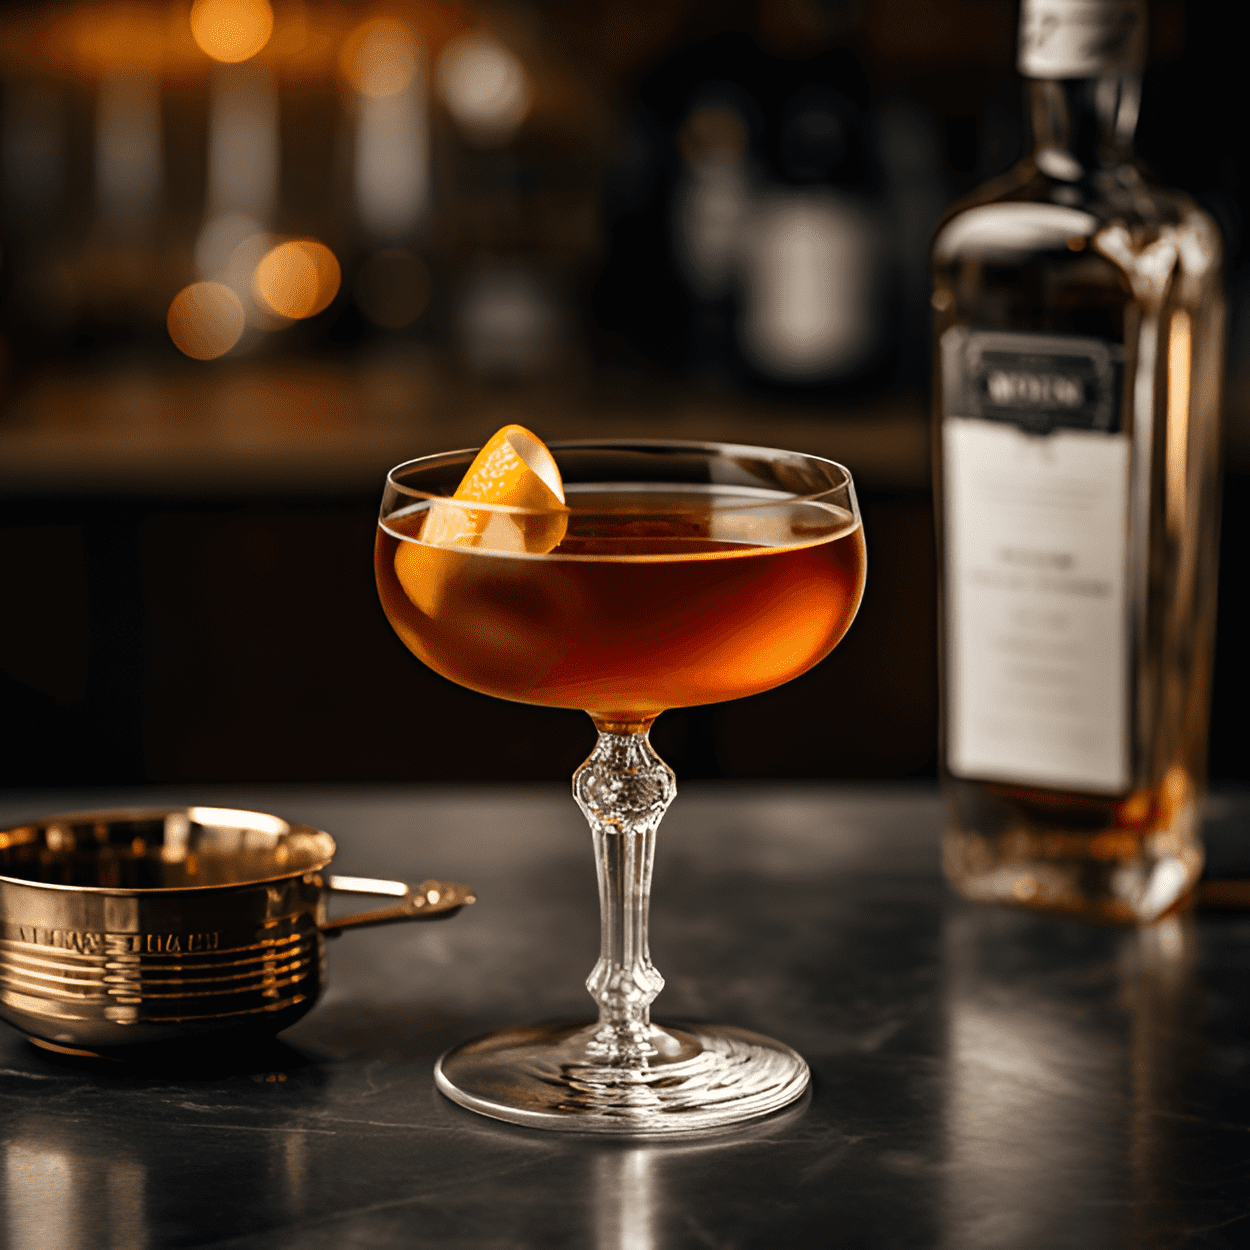 Fox River Cocktail Recipe - The Fox River cocktail has a complex and well-balanced taste. It is slightly sweet, with a hint of bitterness from the bitters, and a smooth, velvety texture. The whiskey provides a strong, warming backbone, while the vermouth adds a touch of herbal complexity.